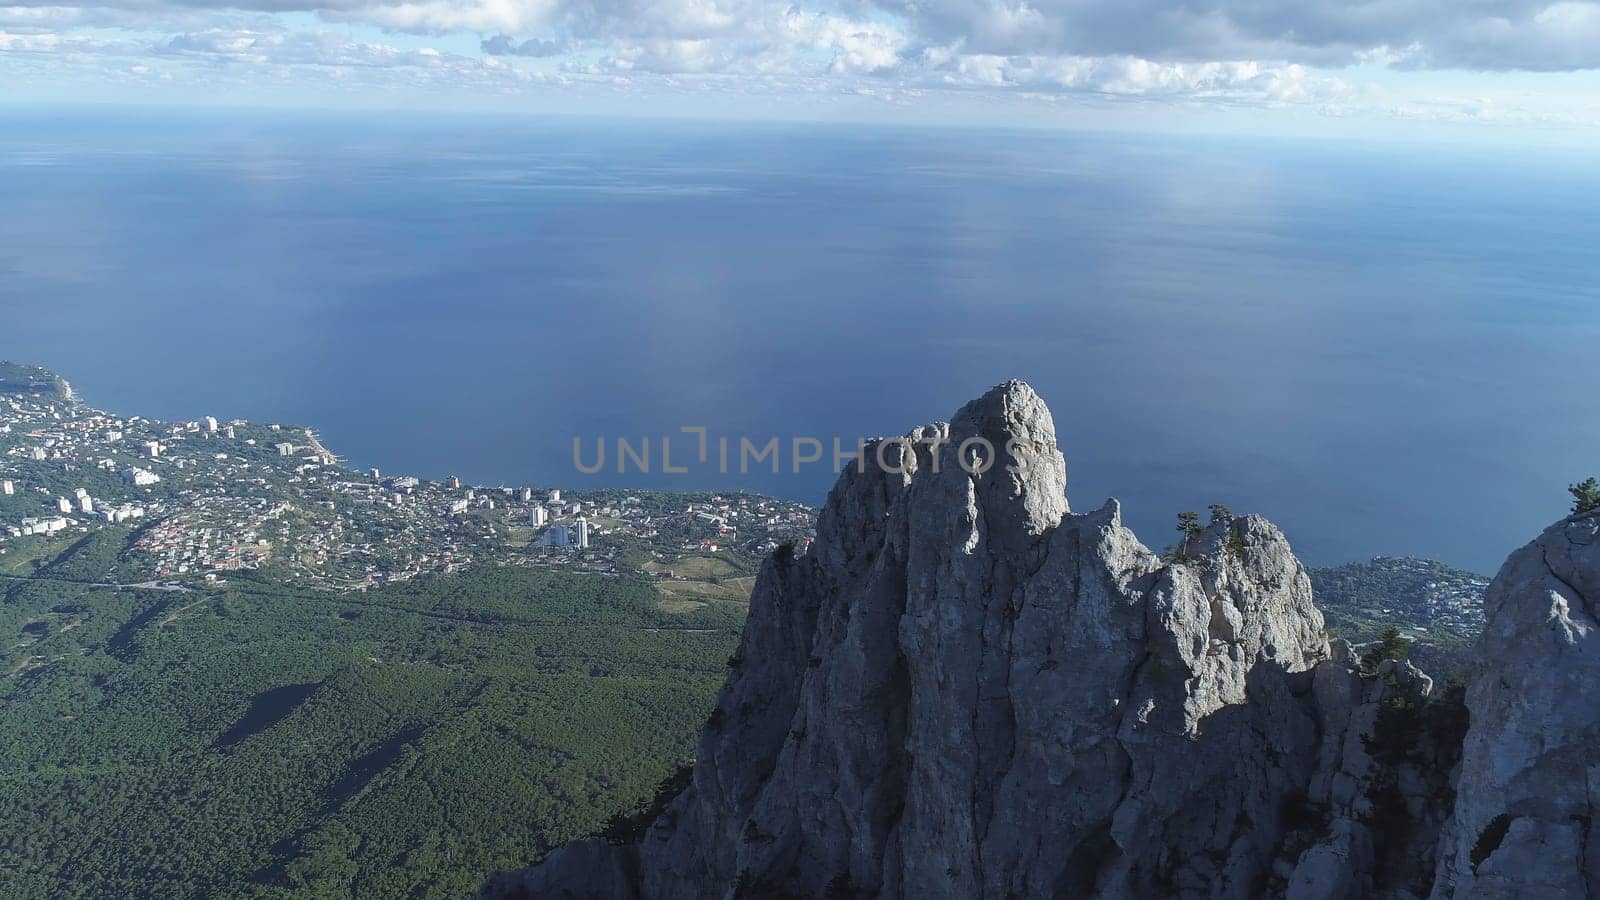 Gorgeous scenery of the blue sea and small city on the shore against beautiful white cliff and standing people with flags in summer day. Shot. Amazing view from above by Mediawhalestock